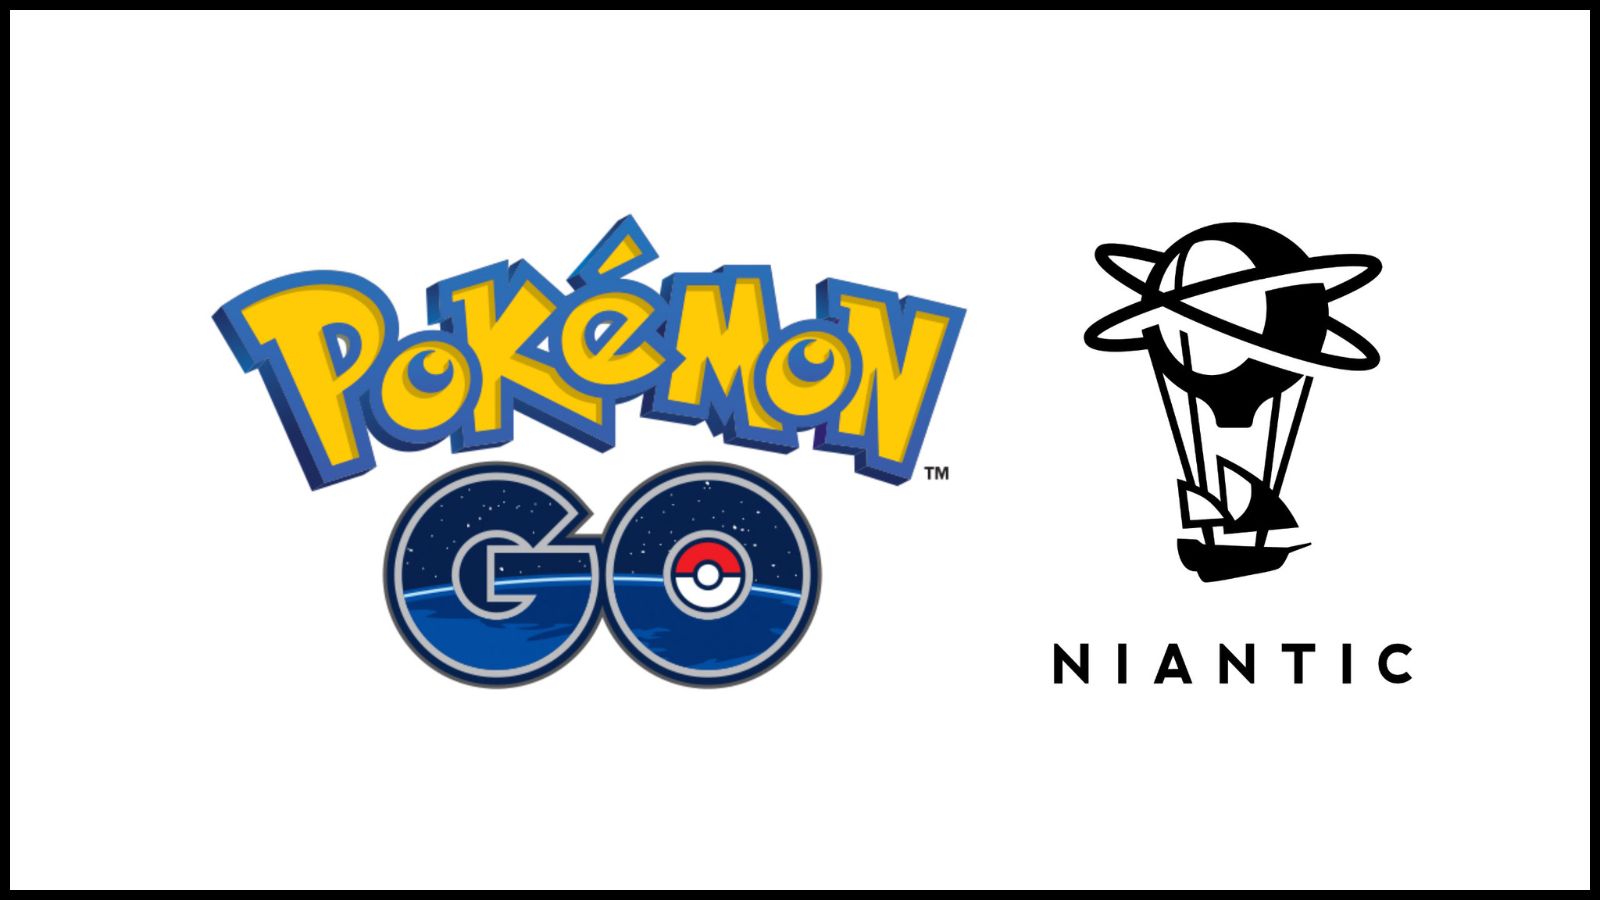 Pokemon Go players slam Niantic following account deletion issues – Dexerto